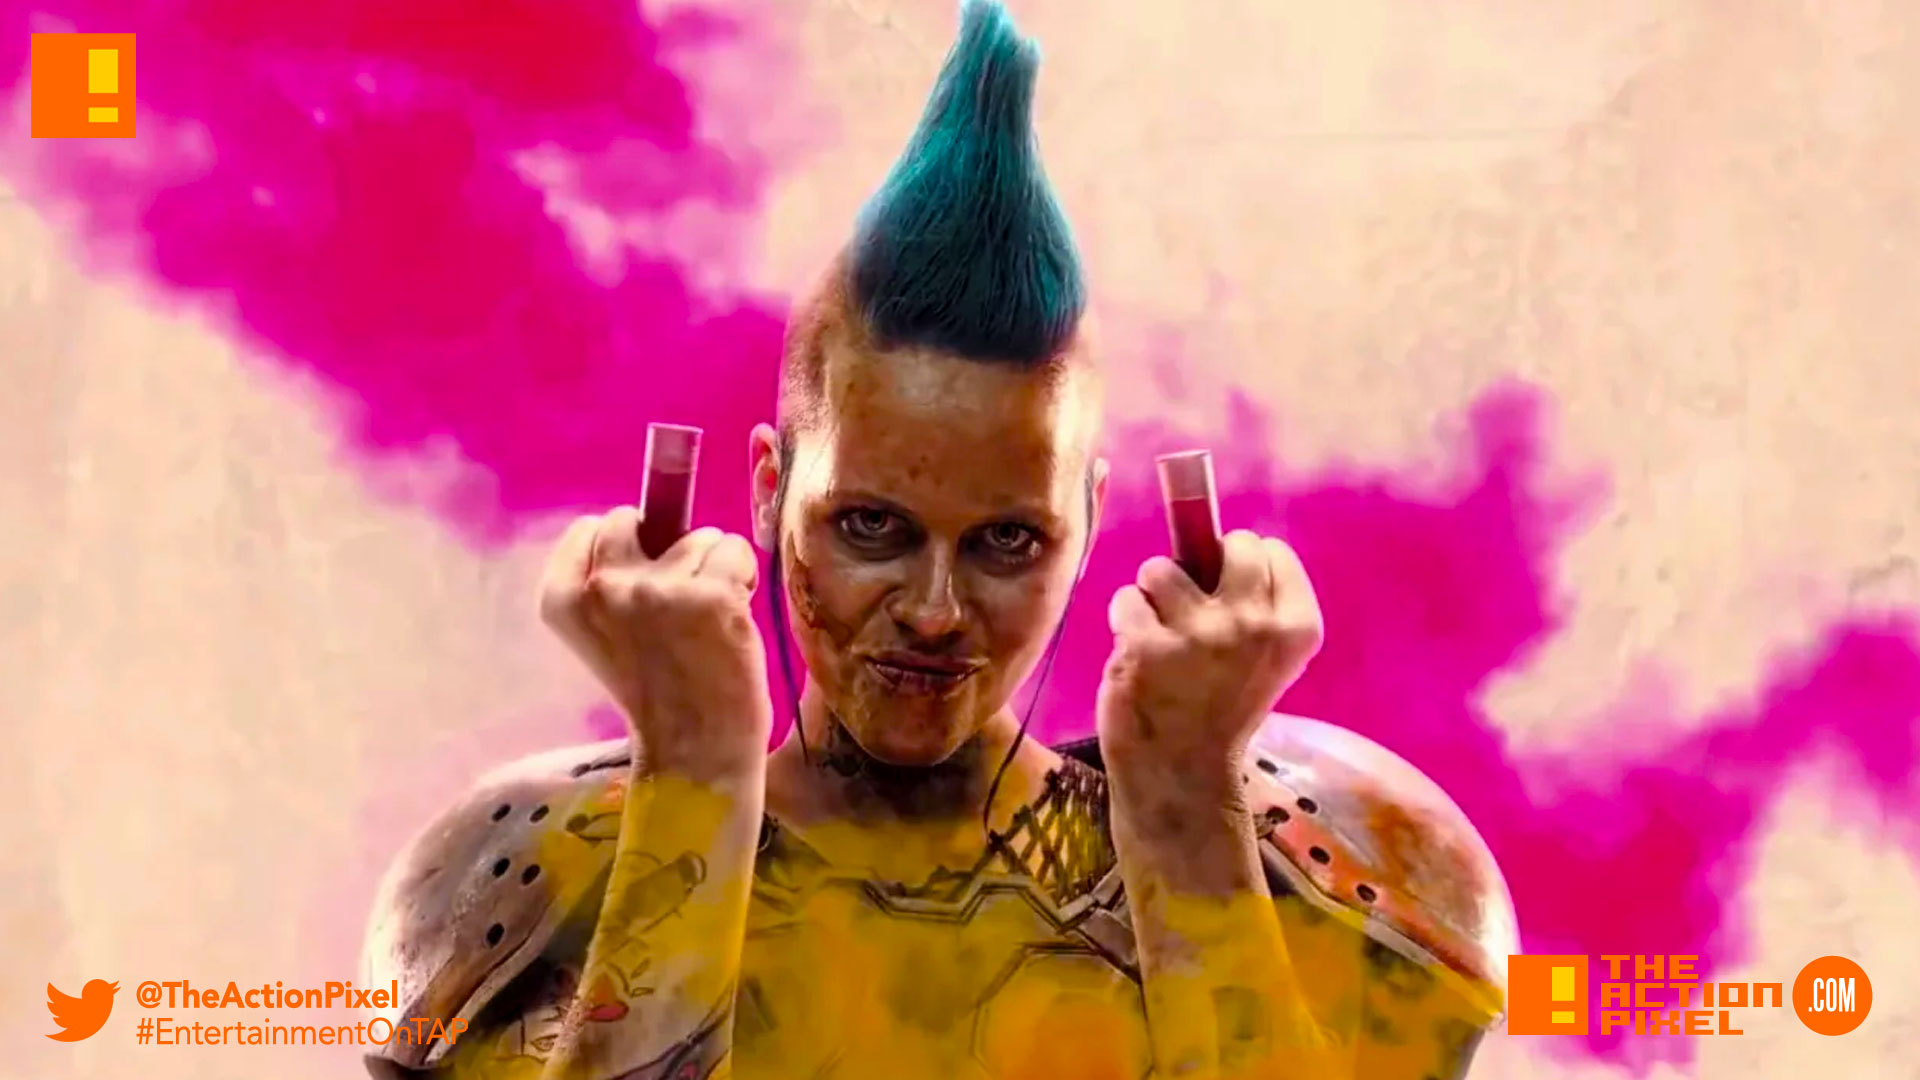 rage 2, rage, id, avalanche studios, bethesda studios, bethesda softworks, rage, official game trailer, trailer, gameplay, gameplay trailer, rage 2 gameplay trailer, the action pixel, entertainment on tap,